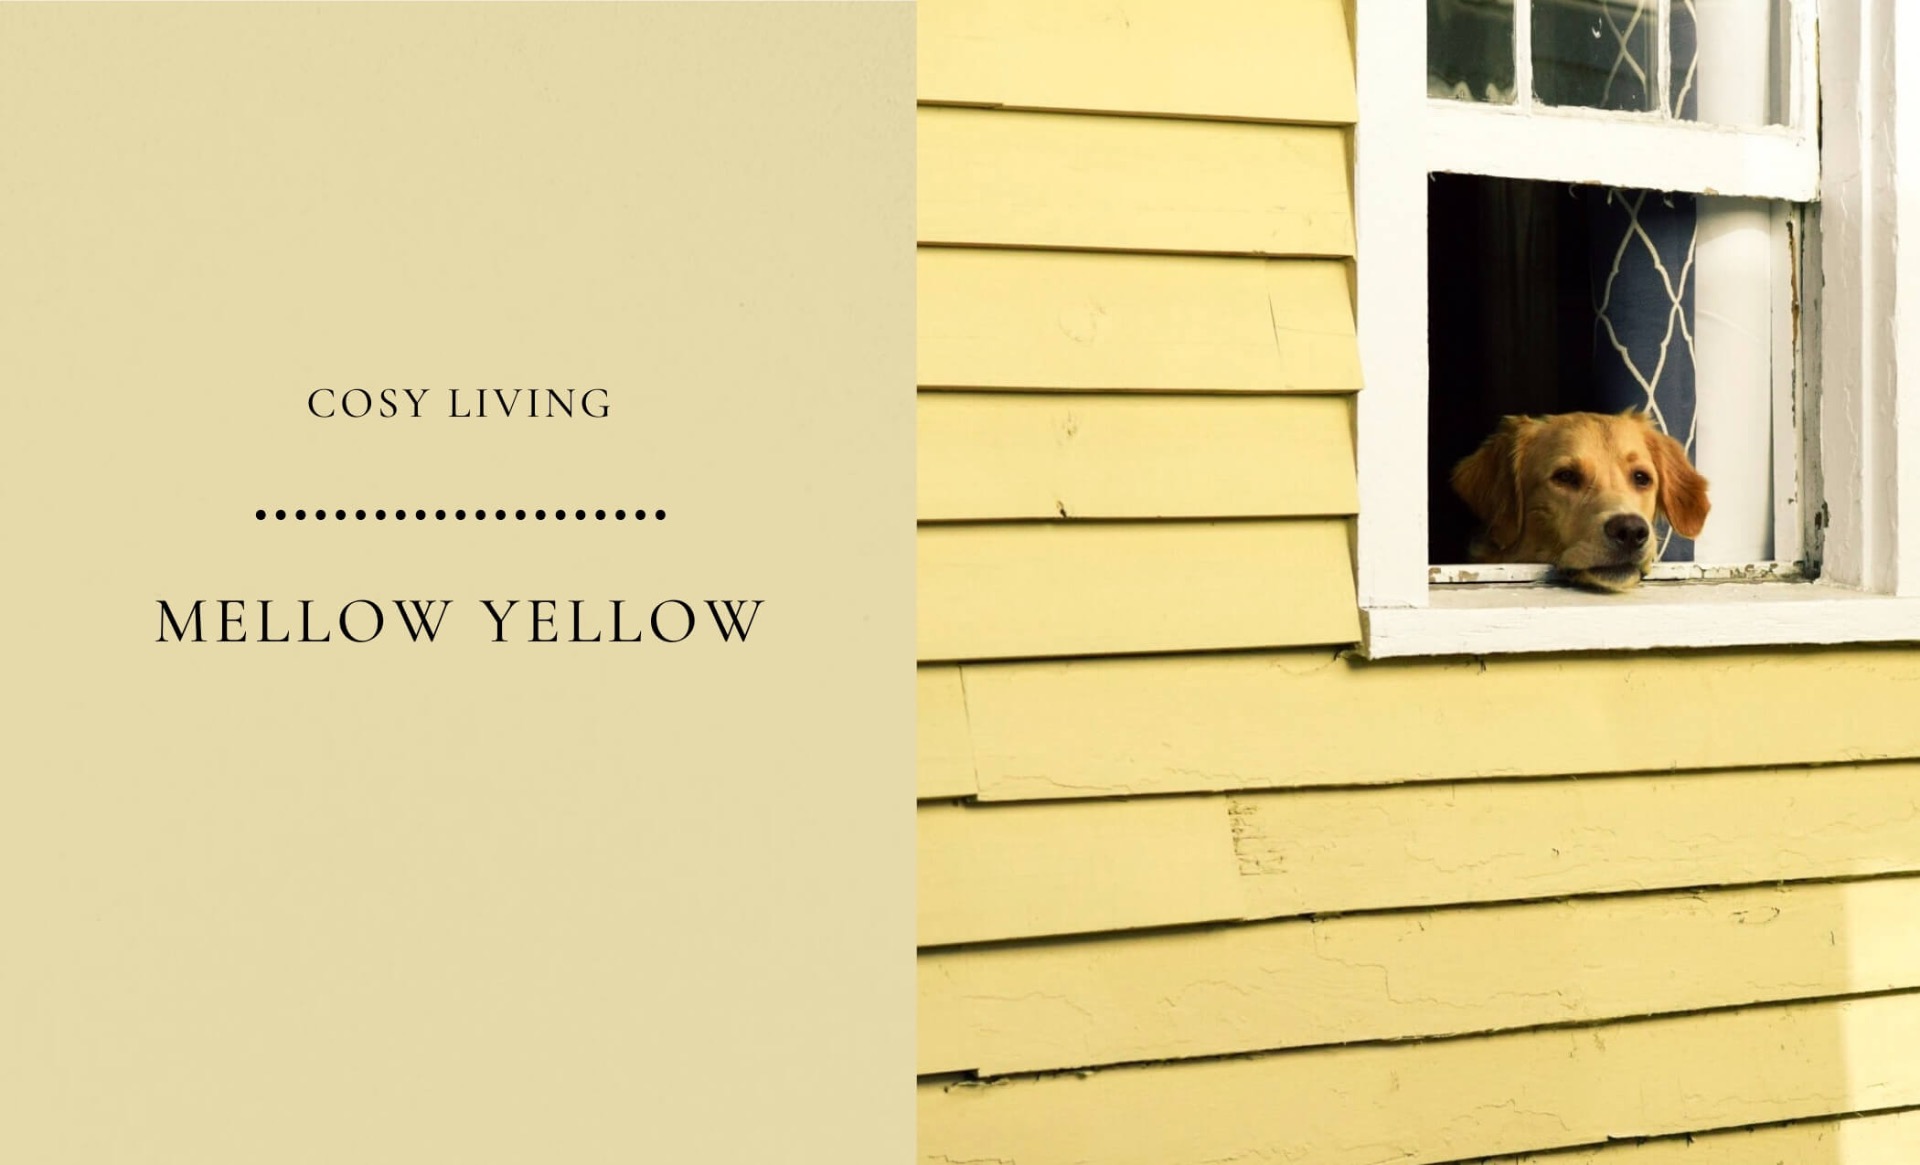 mellow yellow is great for living room walls